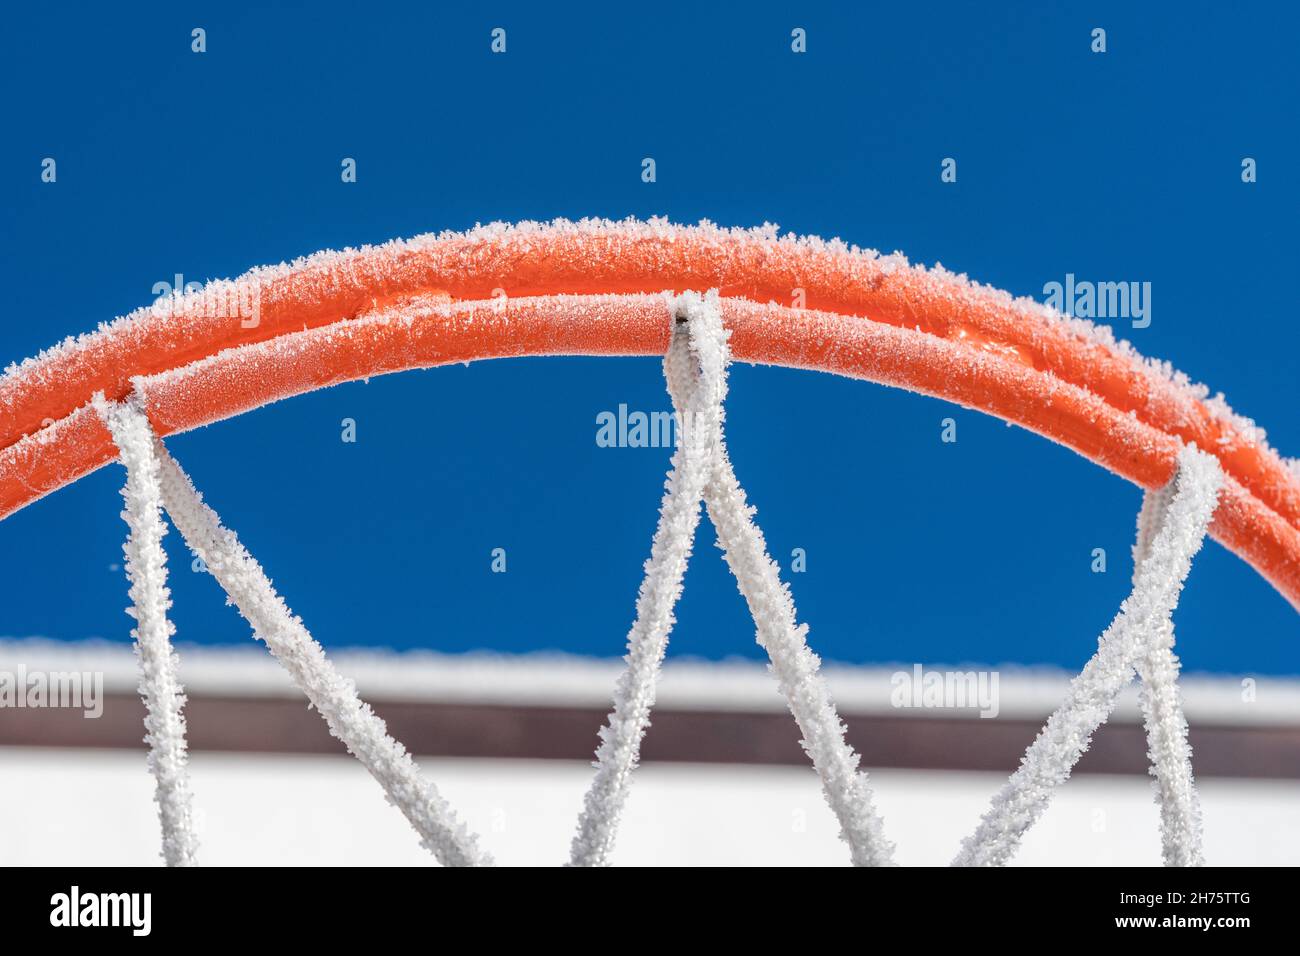 a close up of an orange frosted basketball hoop against blue sky Stock Photo